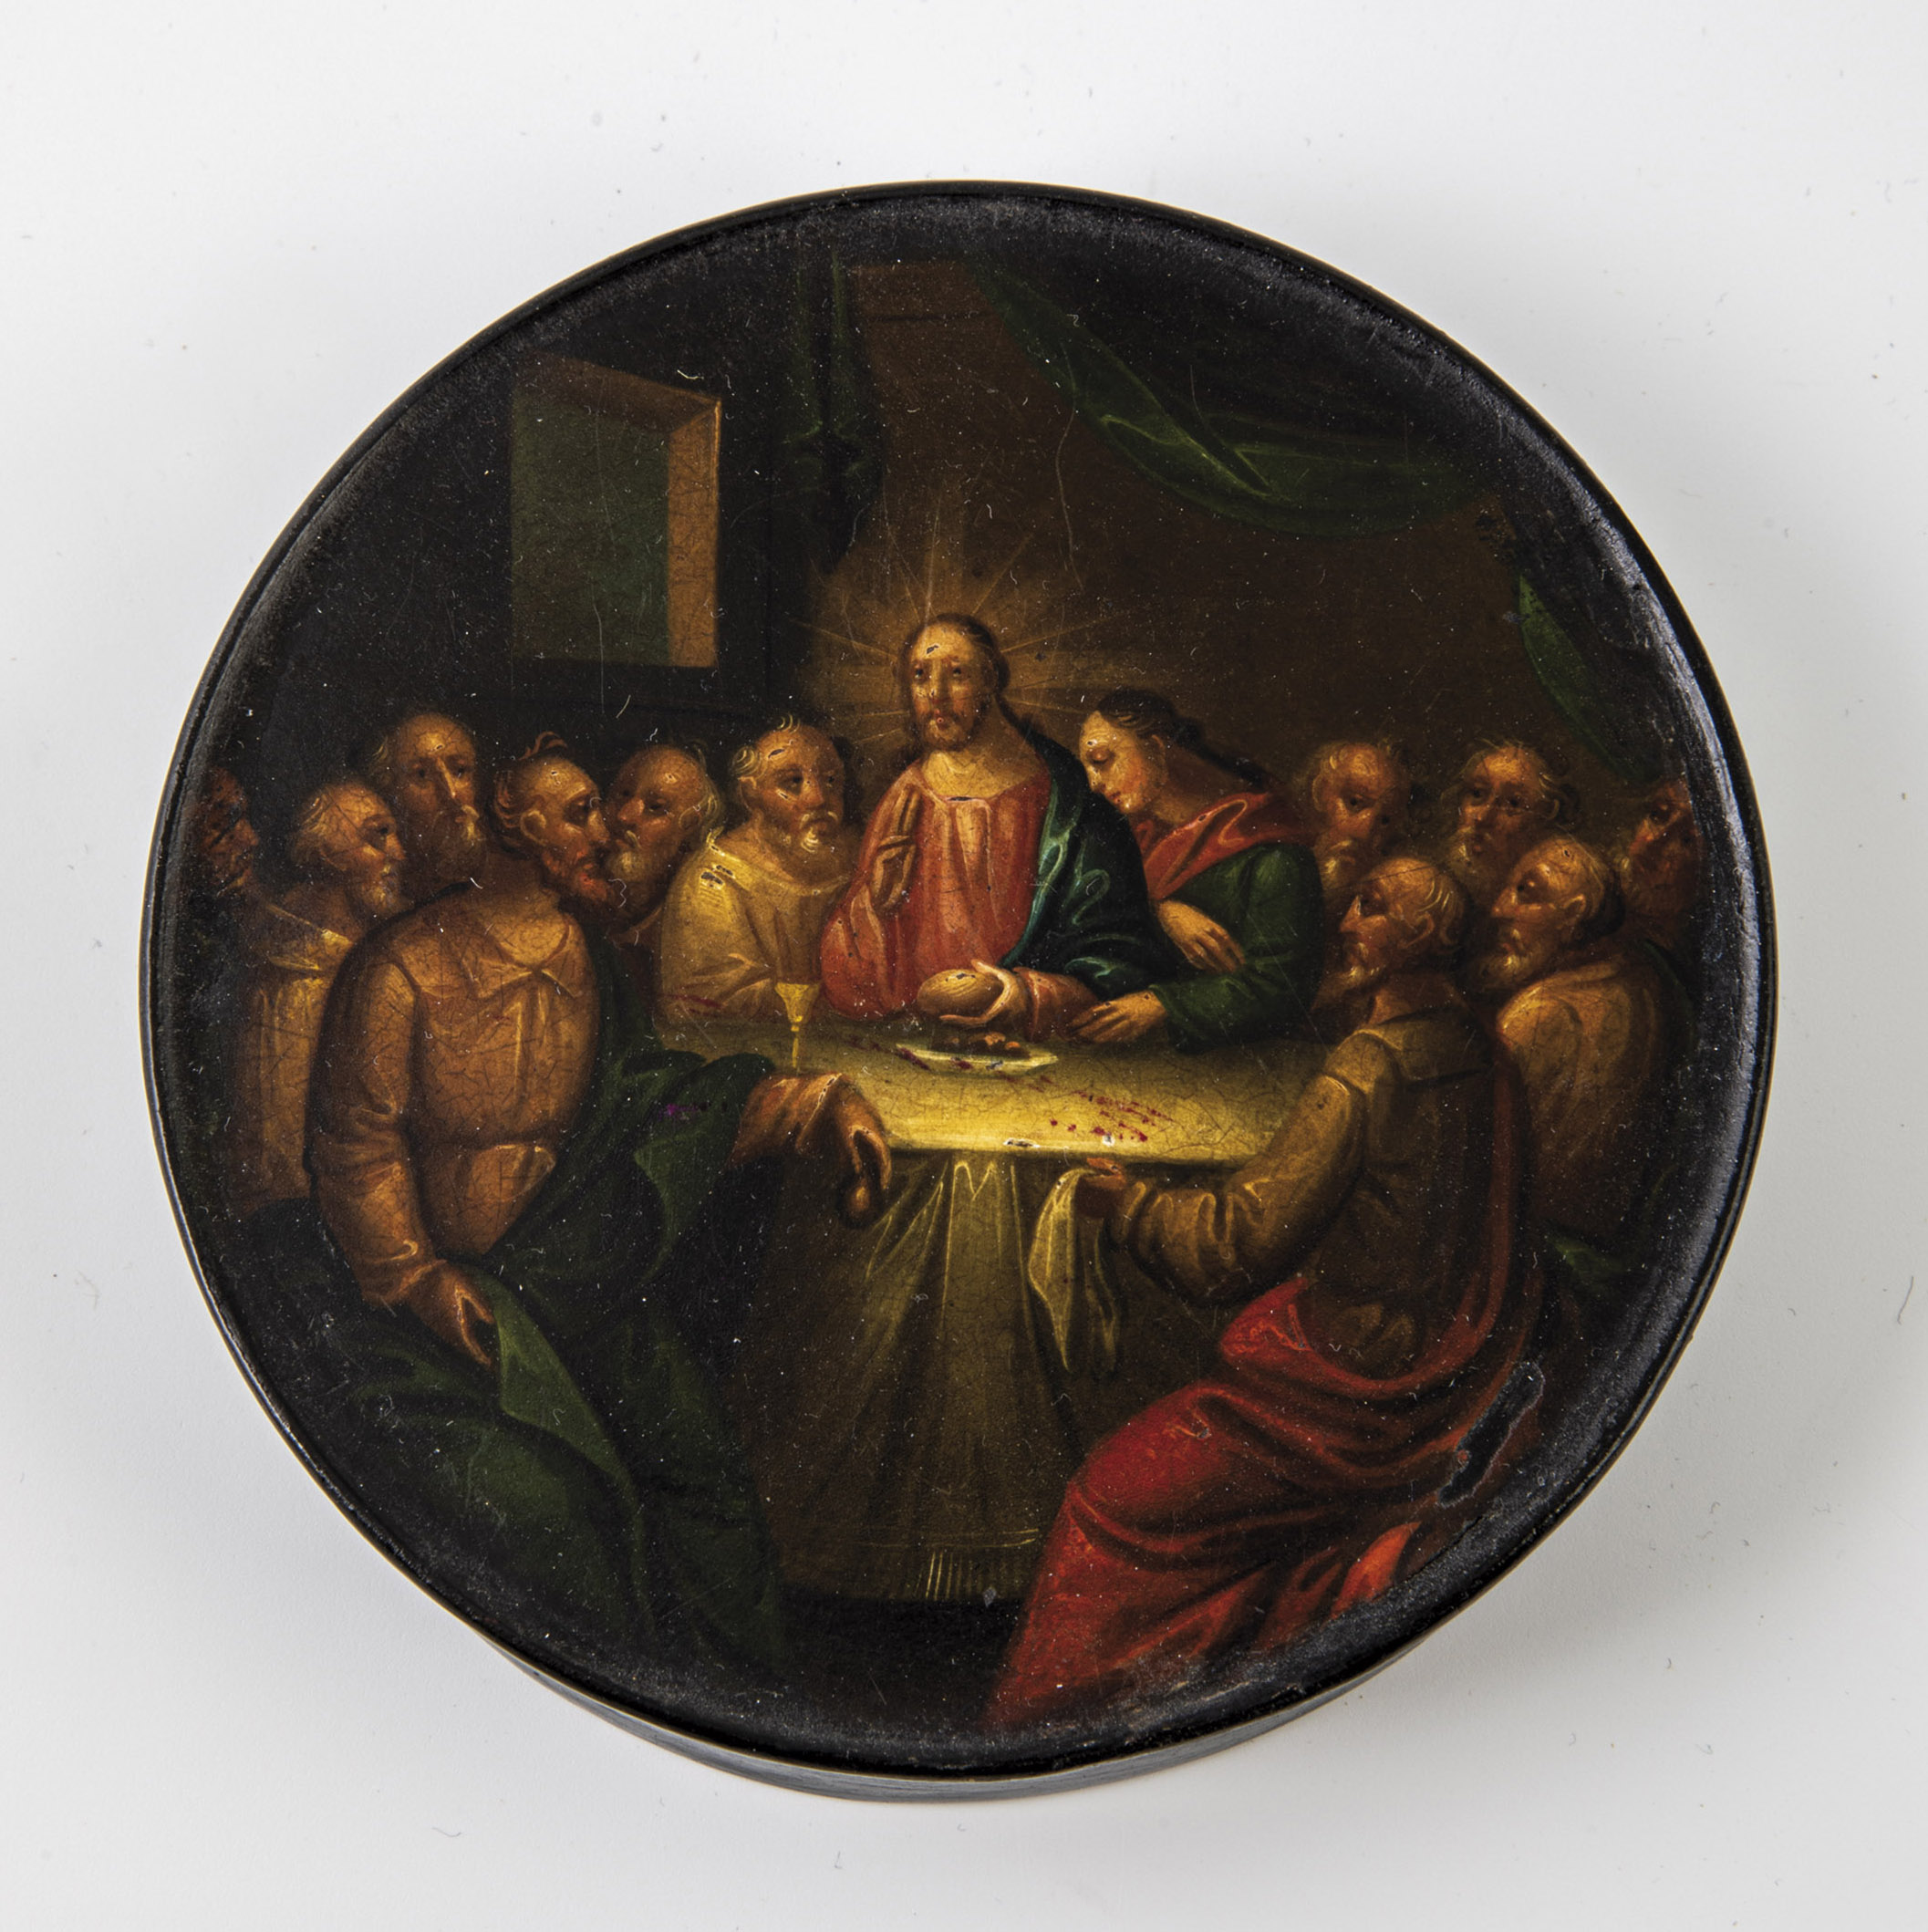 Box with the last supper